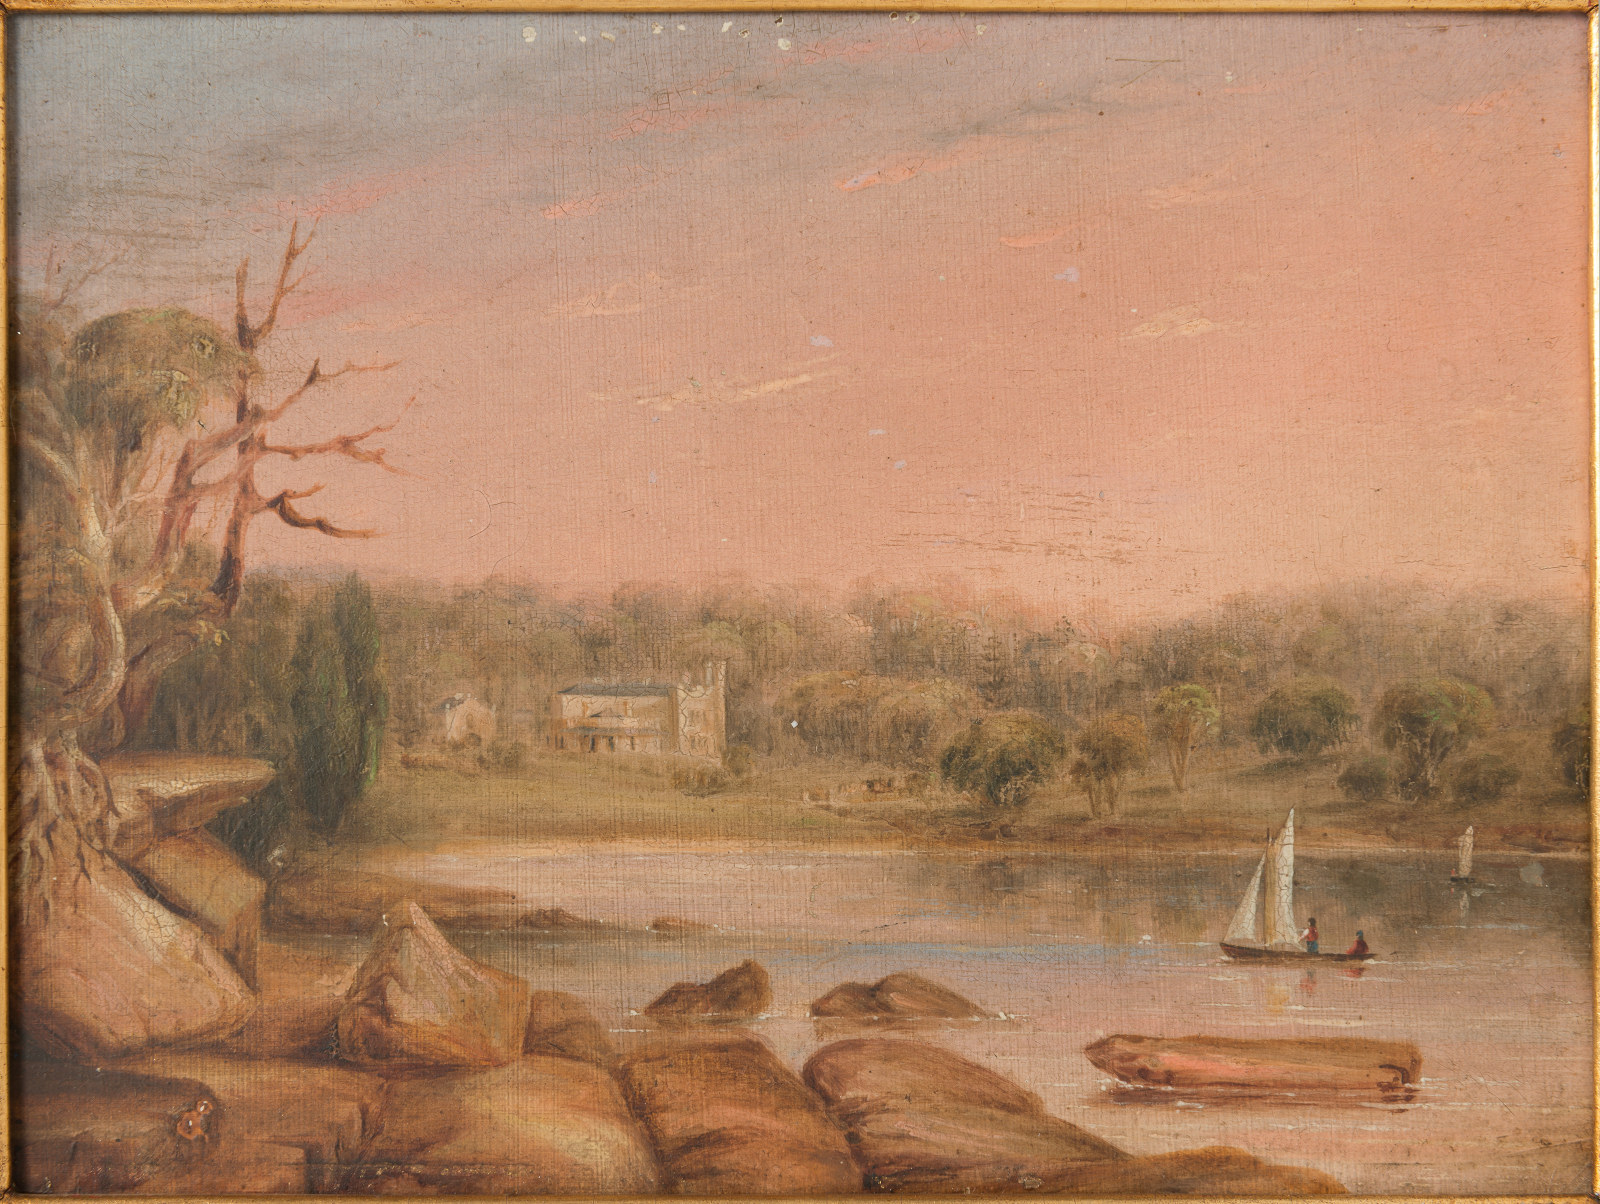 Vaucluse House, painted by George Peacock, 1846-1850